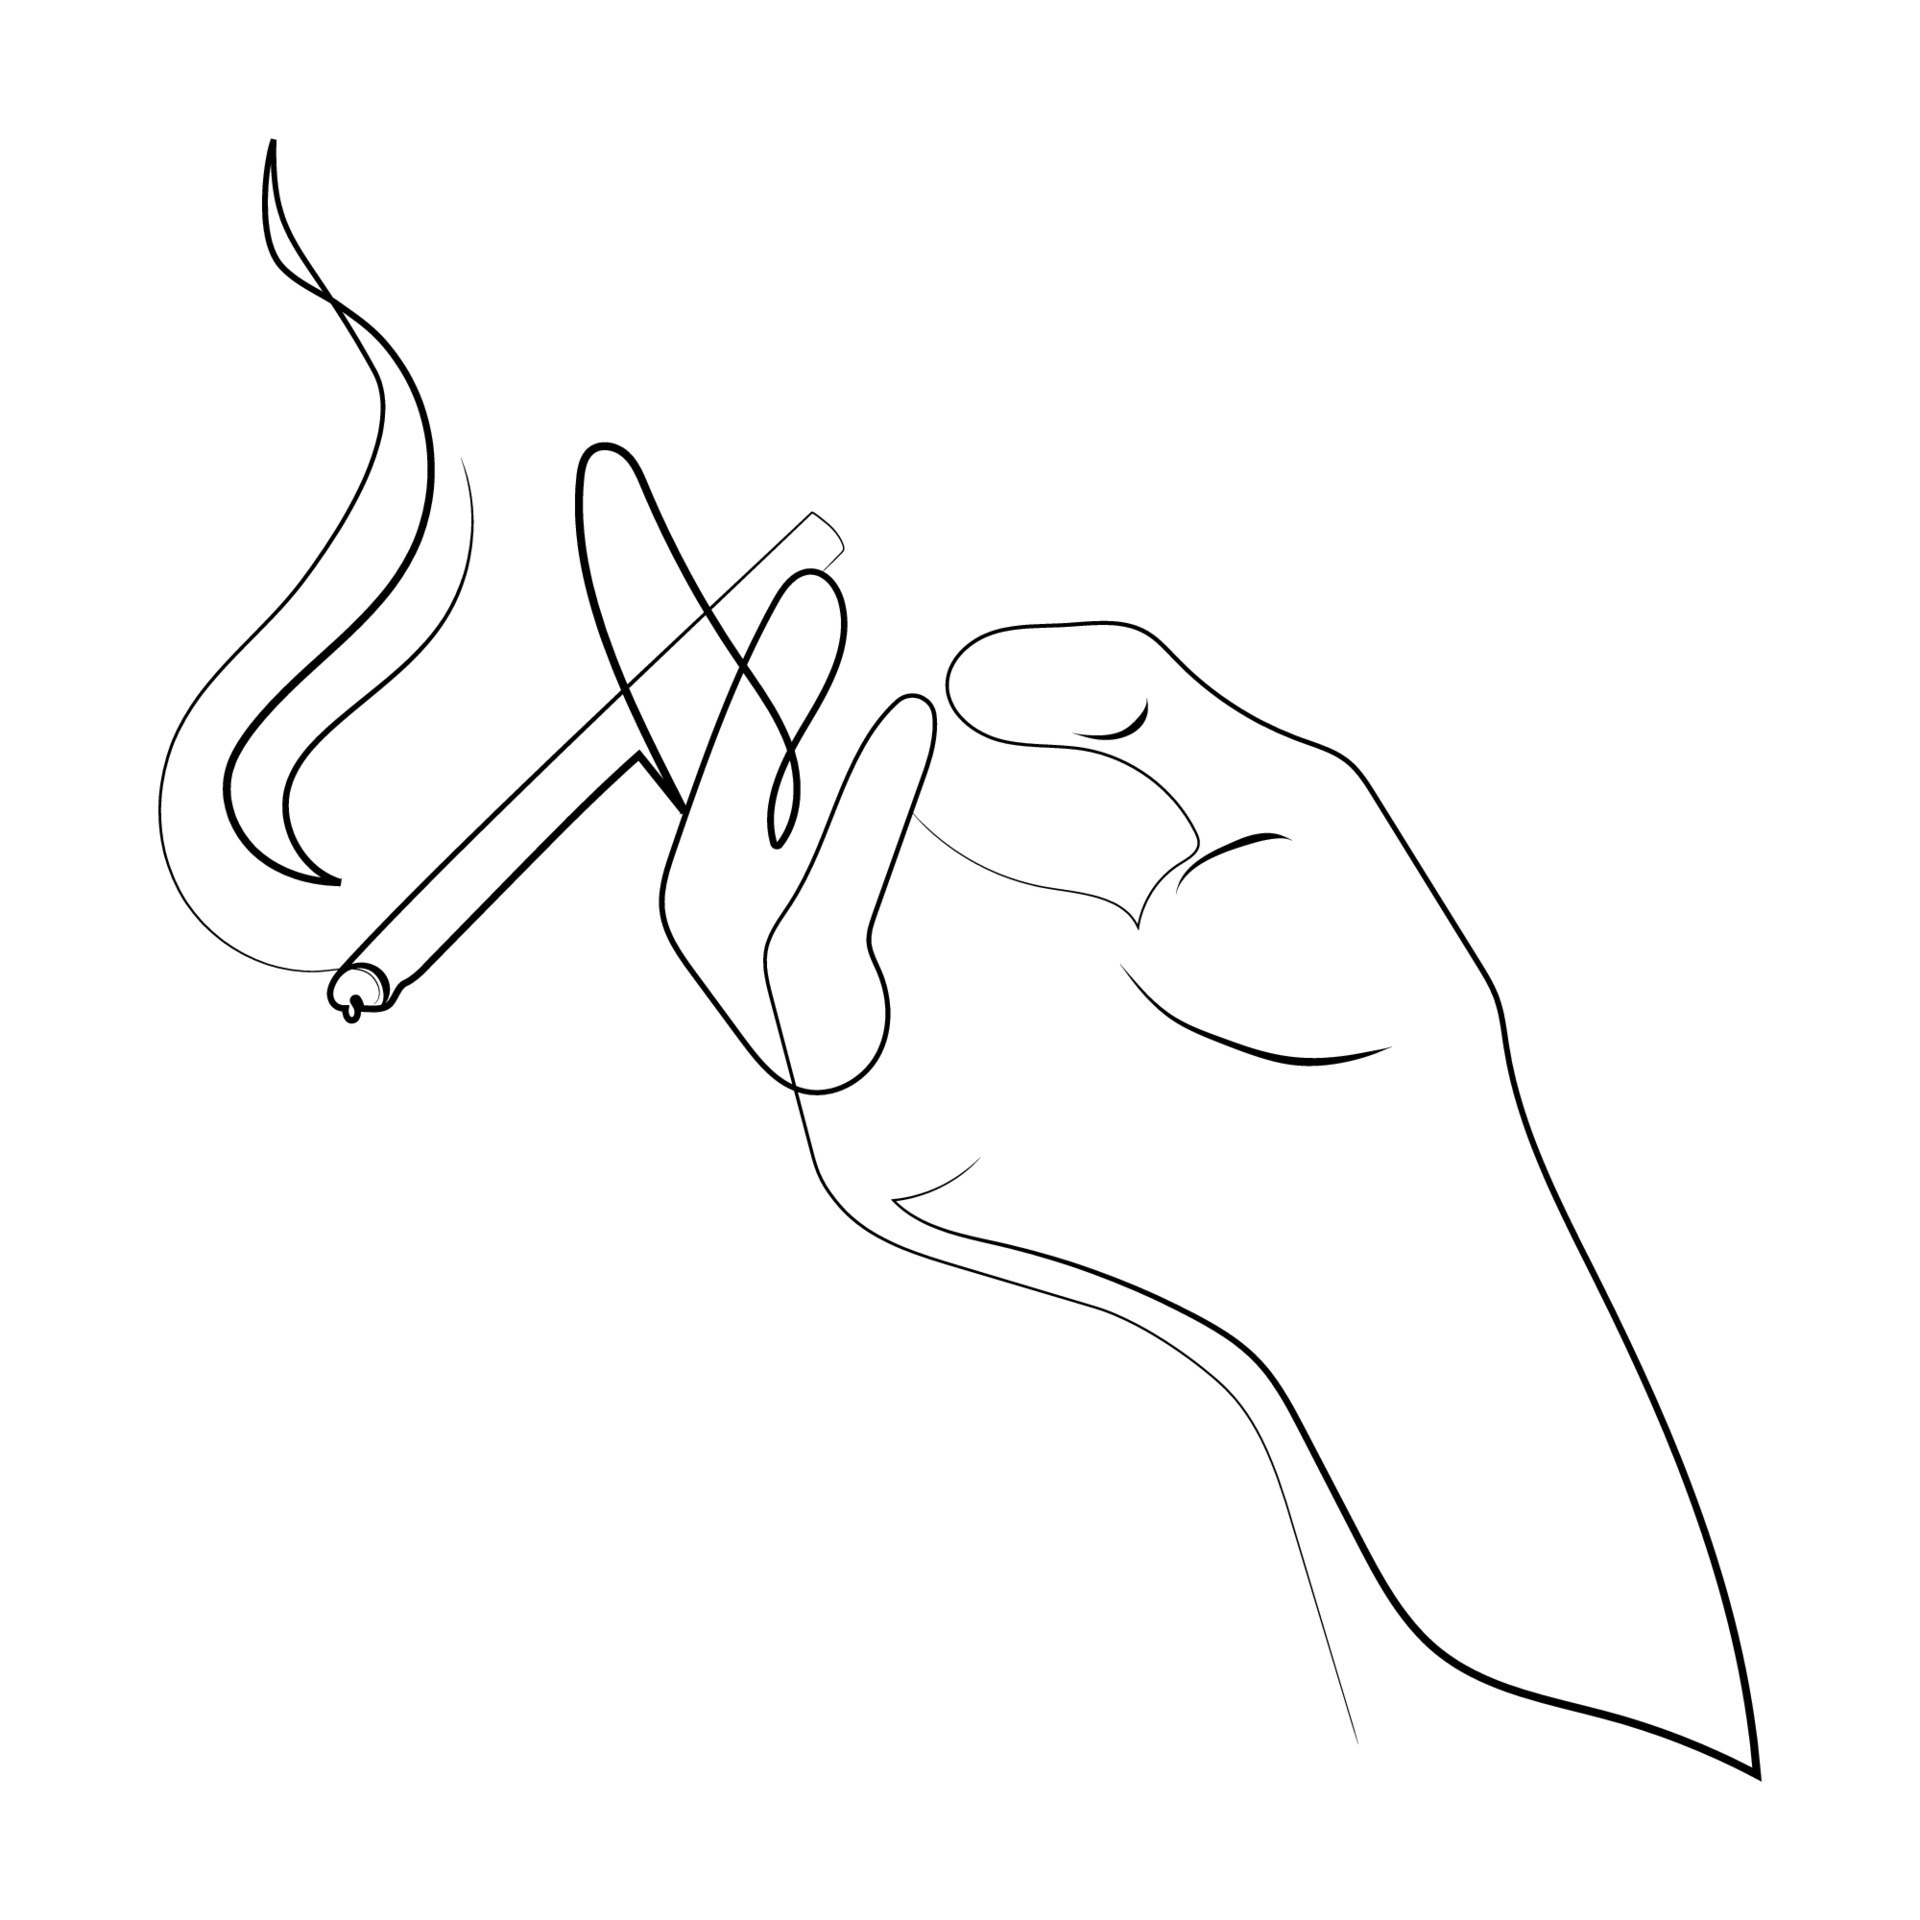 Cigar drawing on white background Royalty Free Vector Image